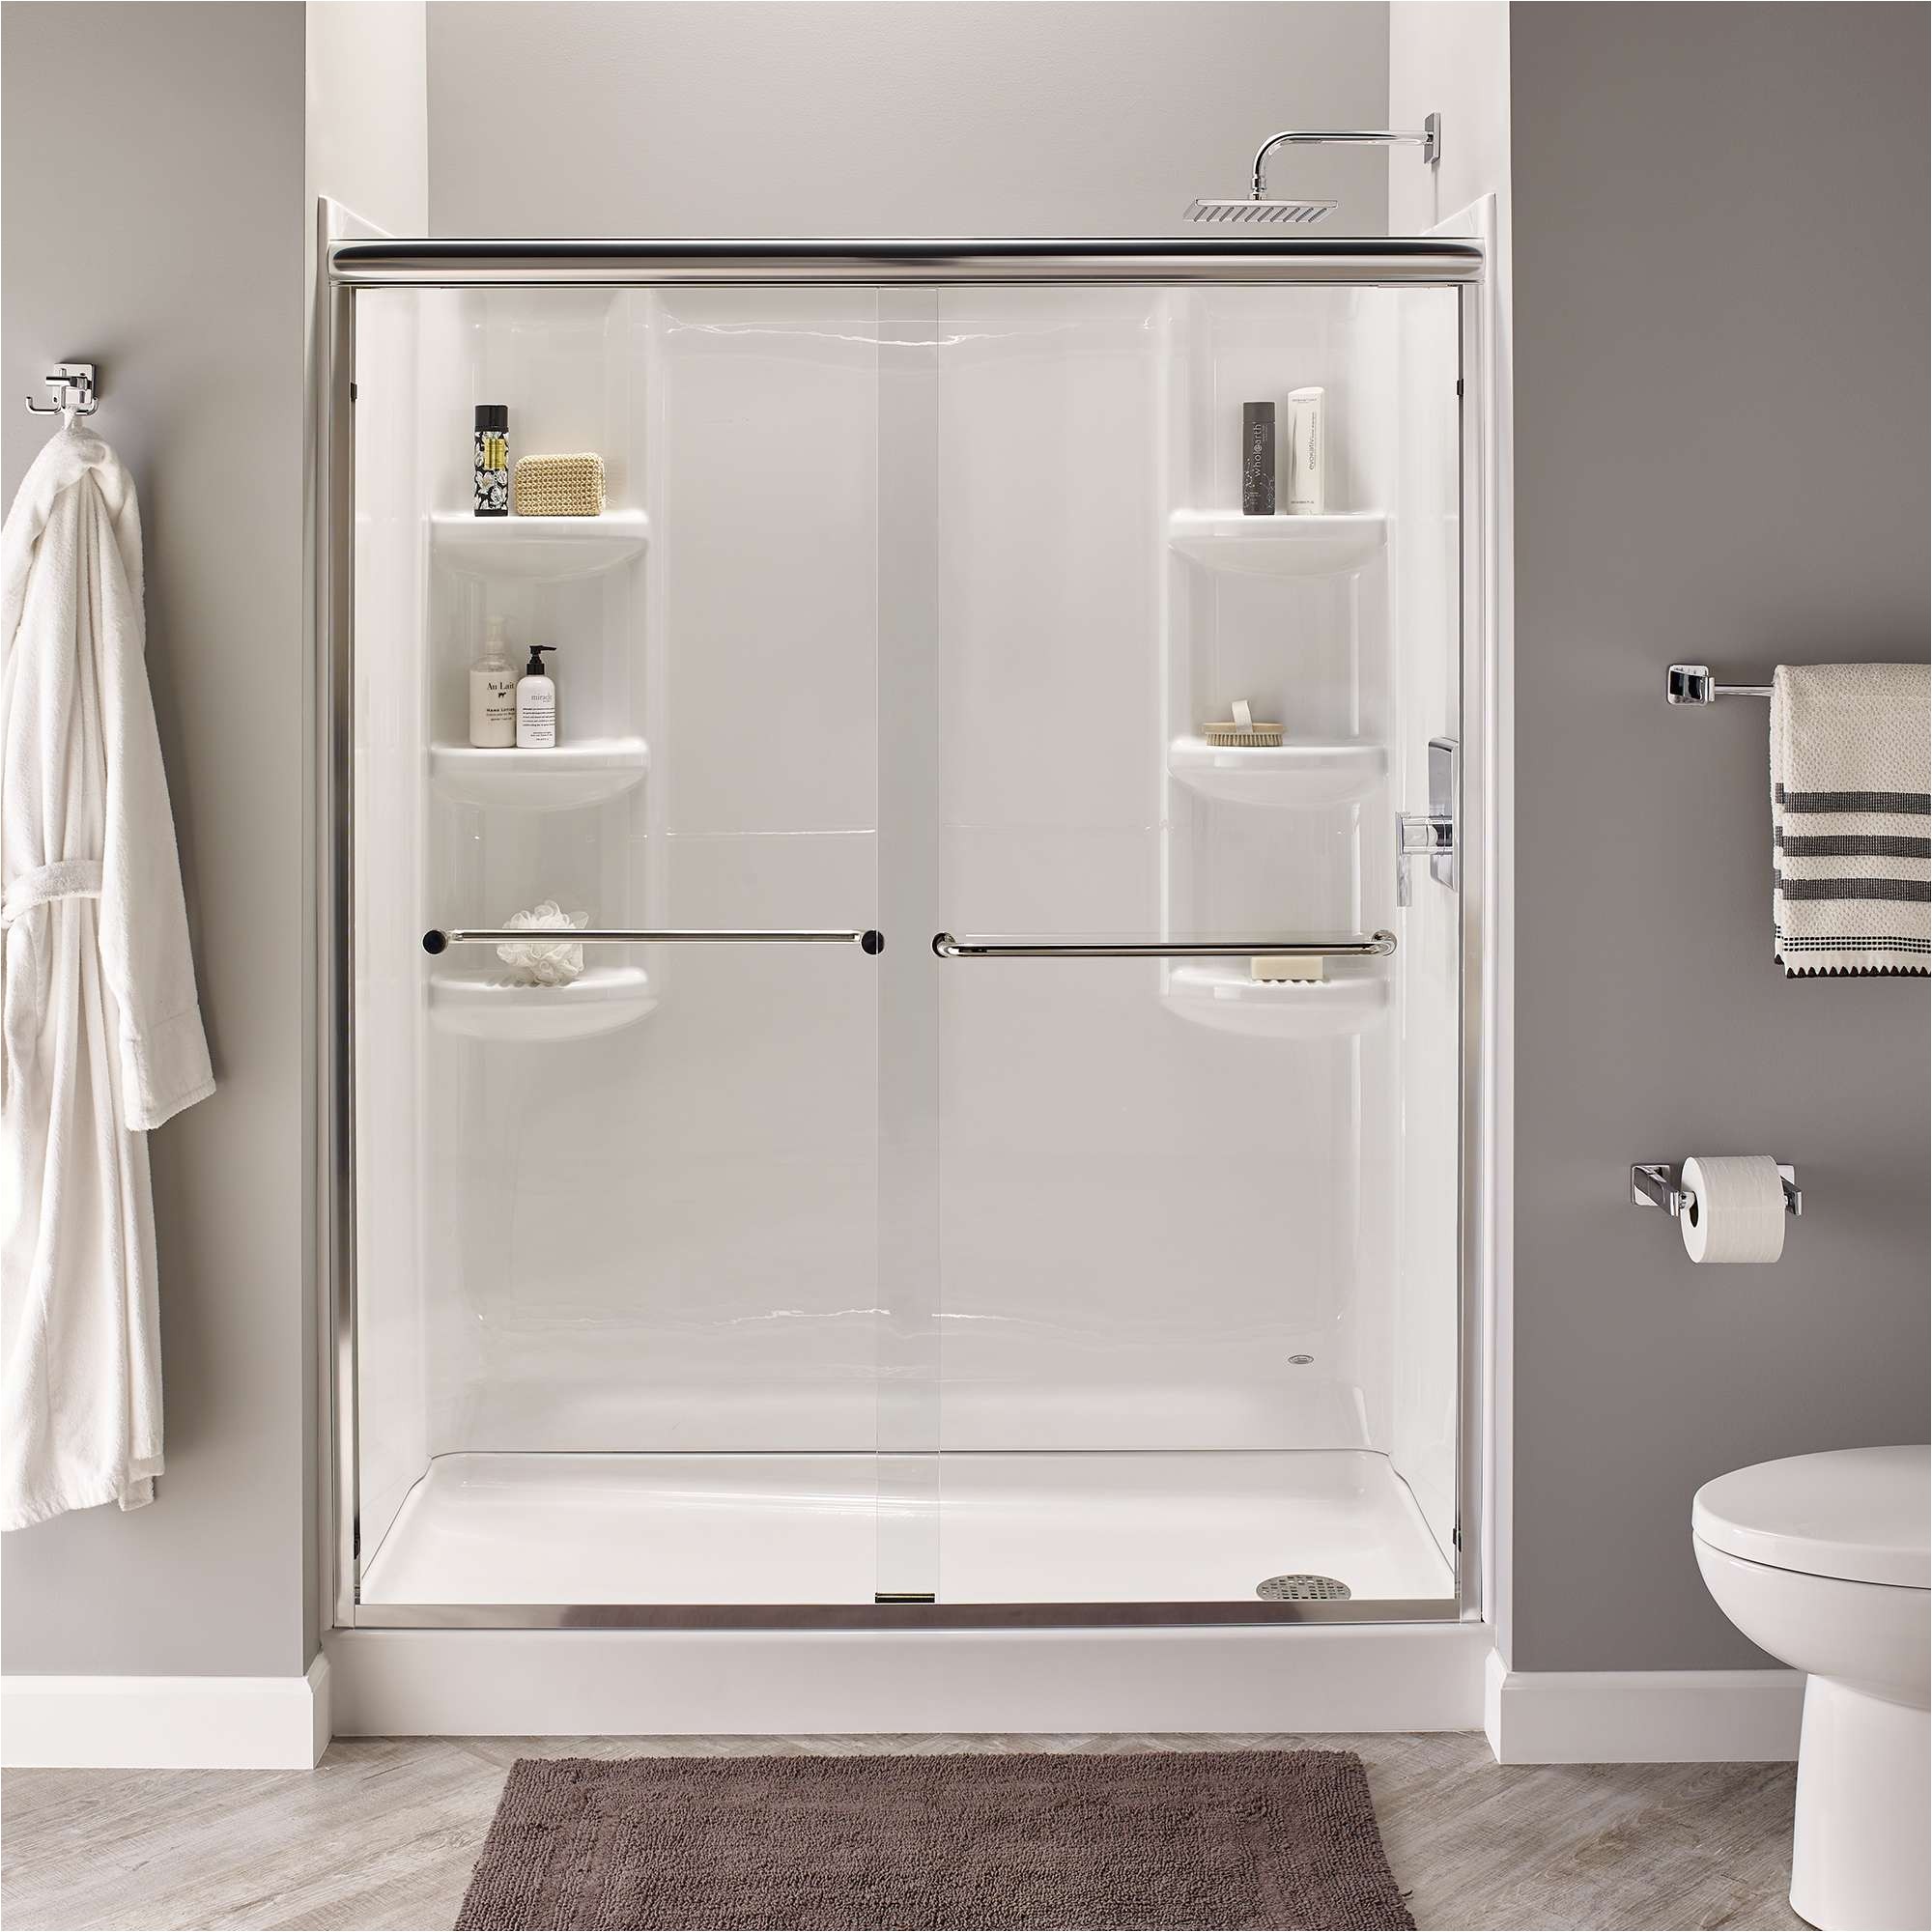 American Standard Shower Stall 40 Awesome Shower Stall Door Replacement Exitrealestate540